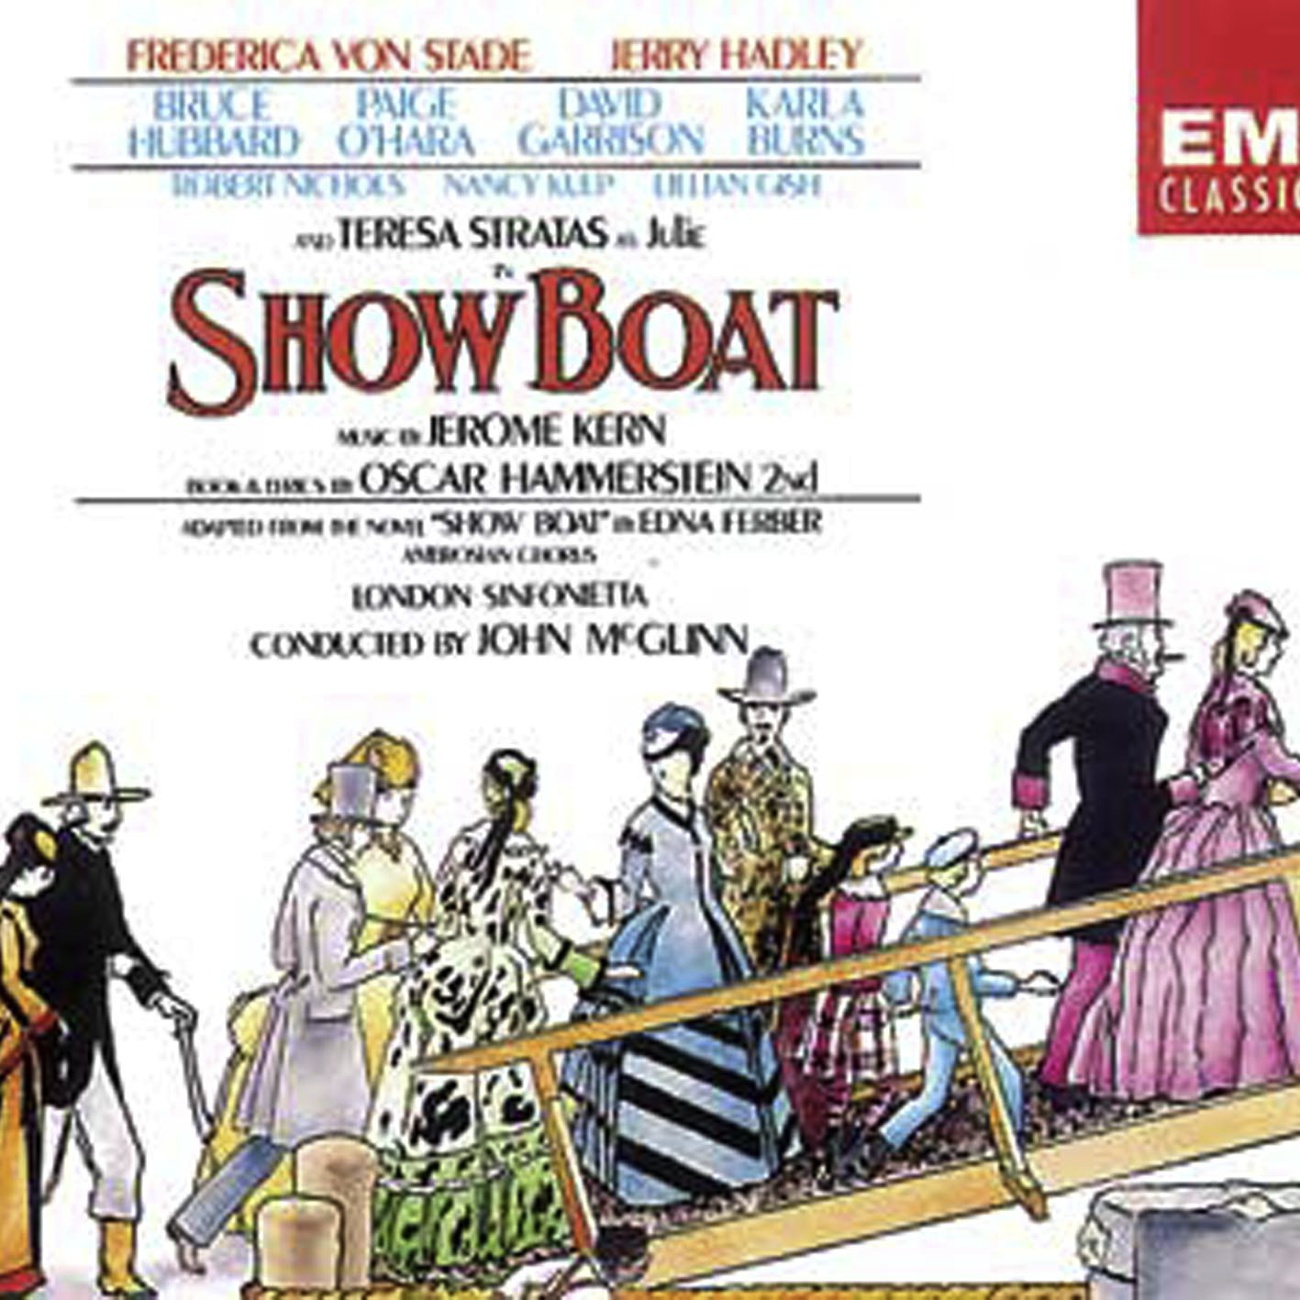 Show Boat, ACT 1, Scene 1: 'Andy!!! Drat that man...' to '...and the Lord knows when he will be'